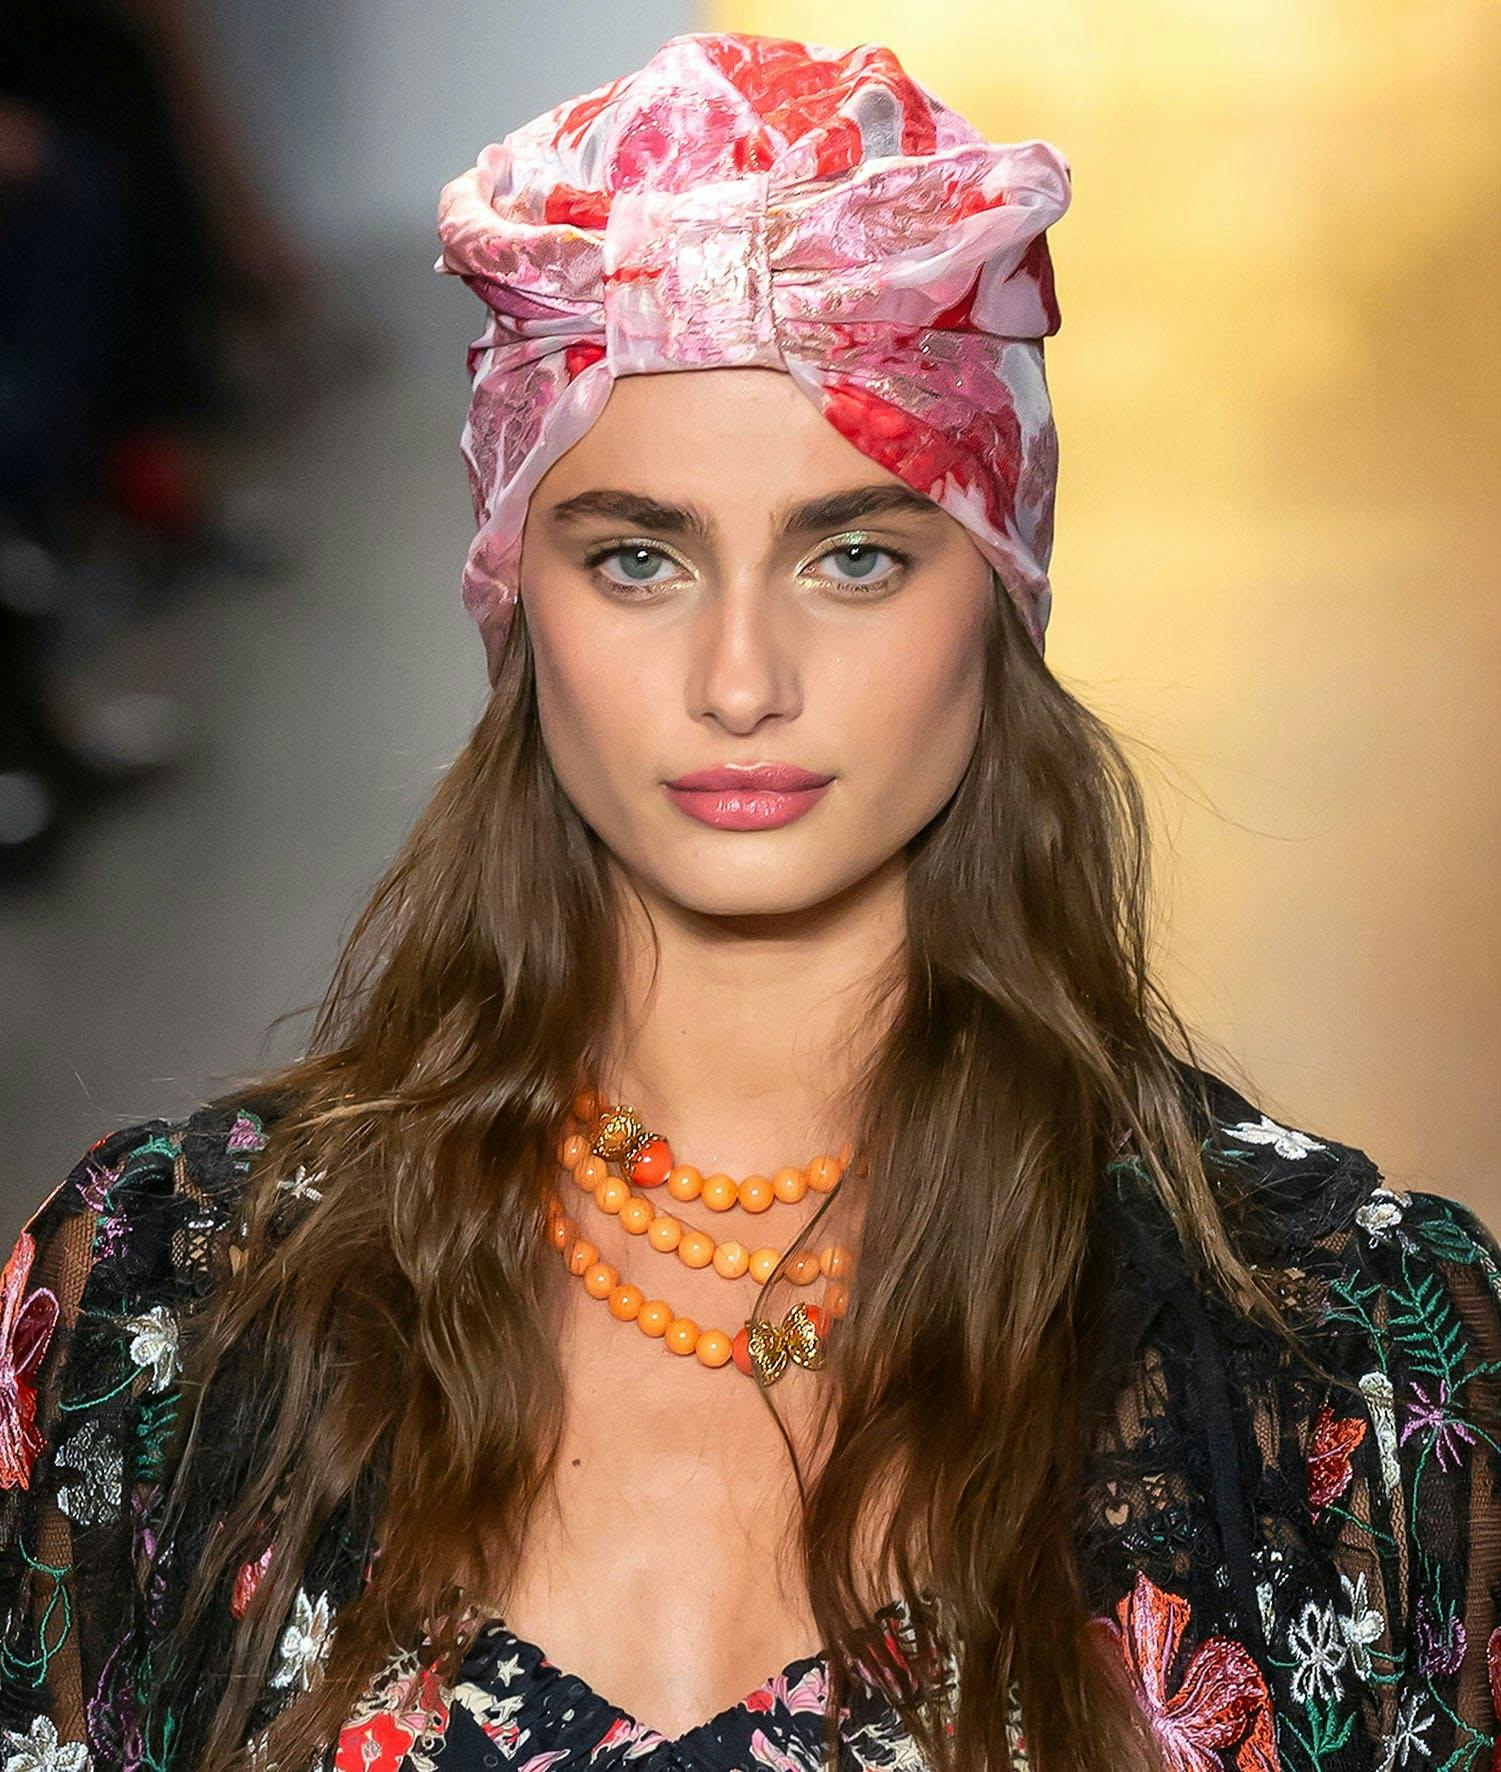 taylor hill,usa,new york fashion week,fashion week,show,runway,collection,ny,clothes,summer,spring,2019,fashion show,catwalk,walking,nyc,model,ready to wear,anna sui,fashion,women accessories adult female person woman clothing scarf face jewelry necklace